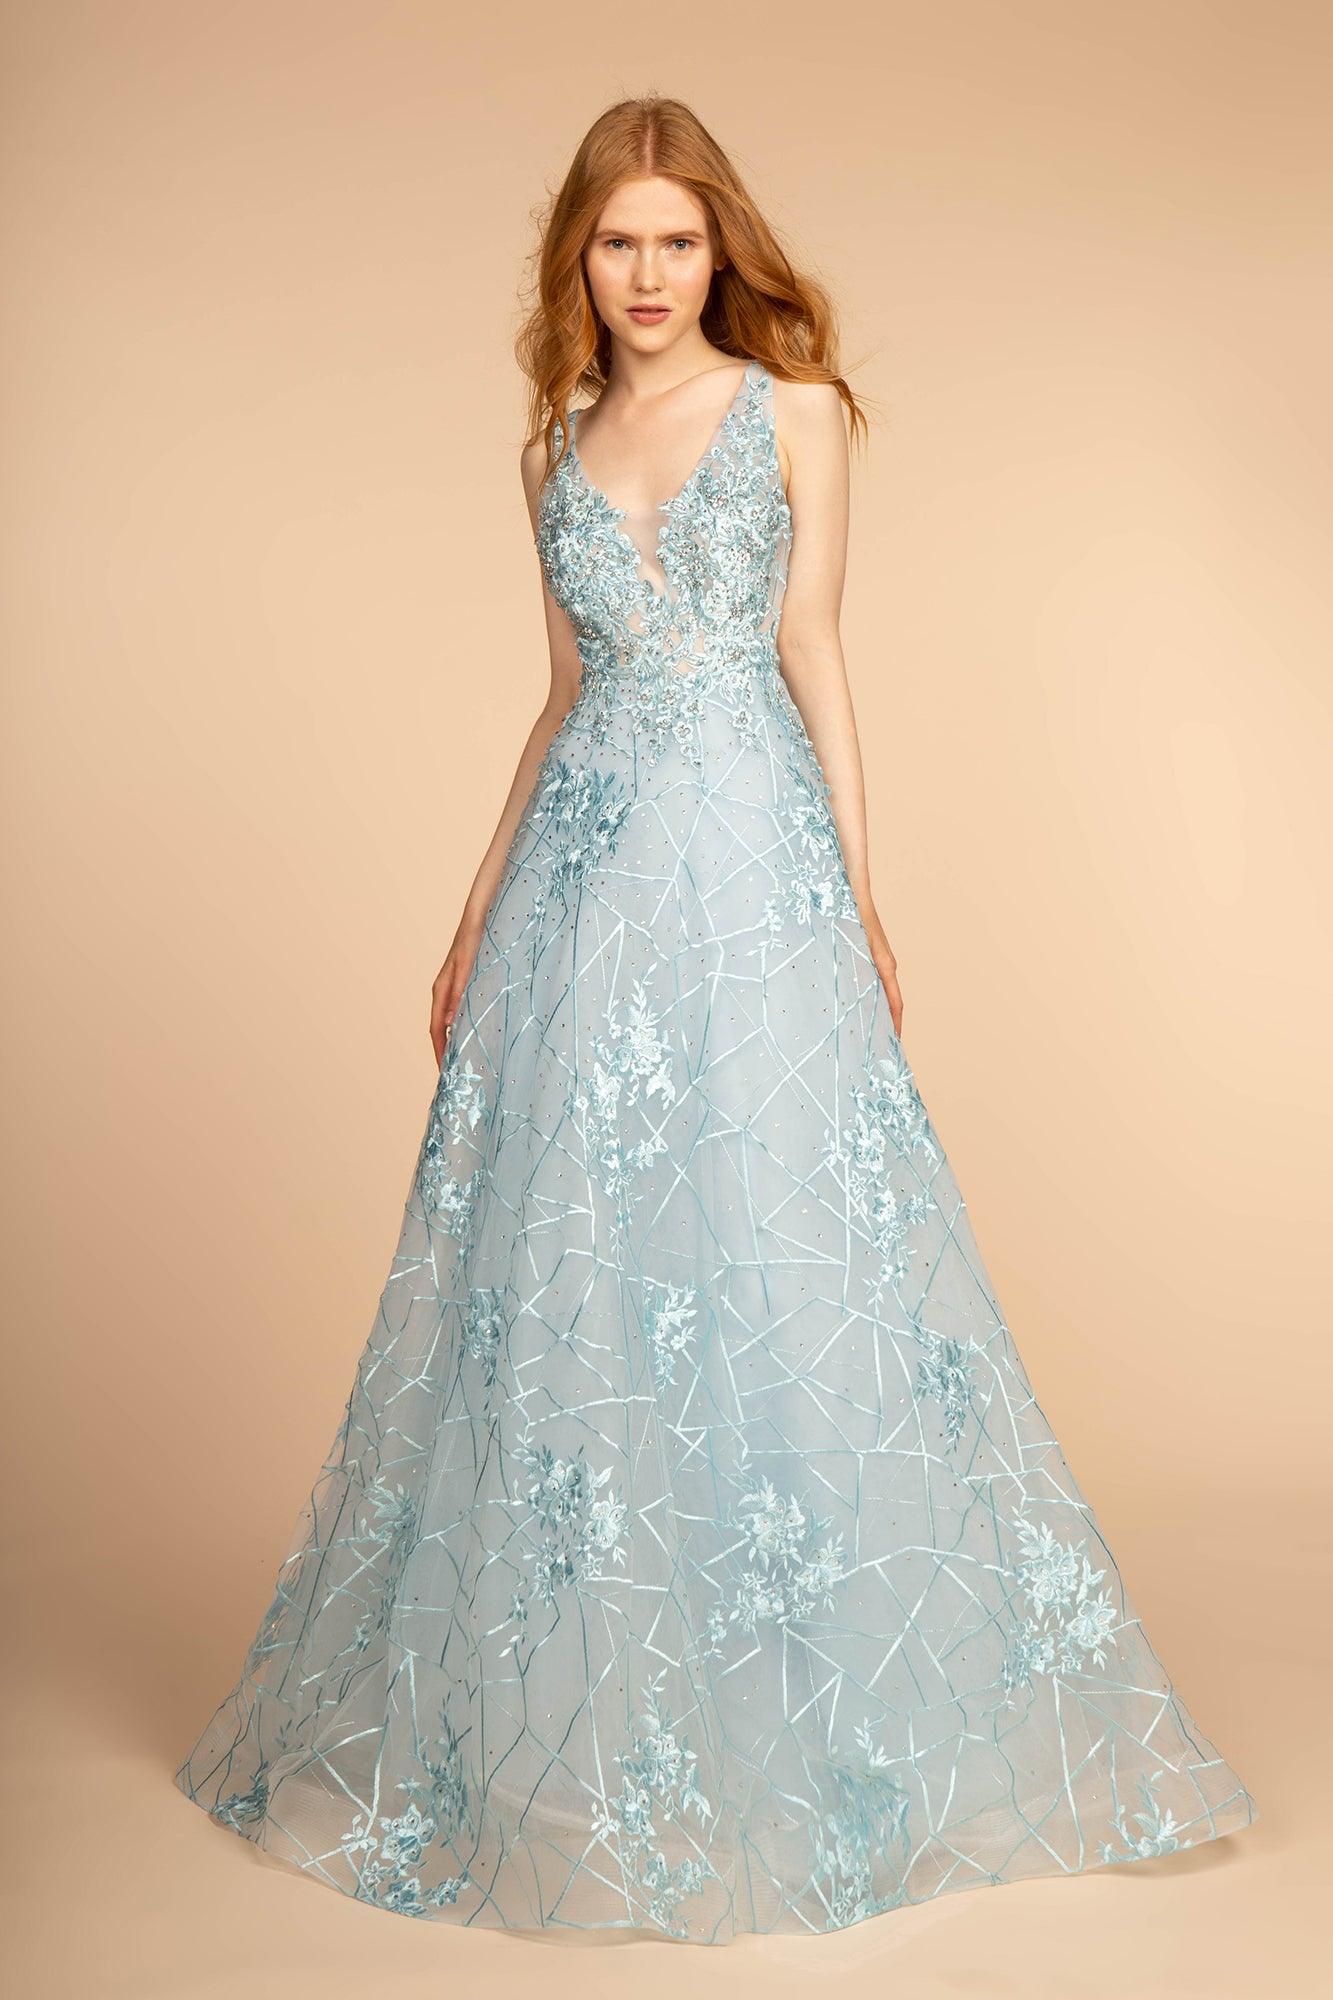 Mesh Illusion Embroidery Long Prom Dress - The Dress Outlet Elizabeth K